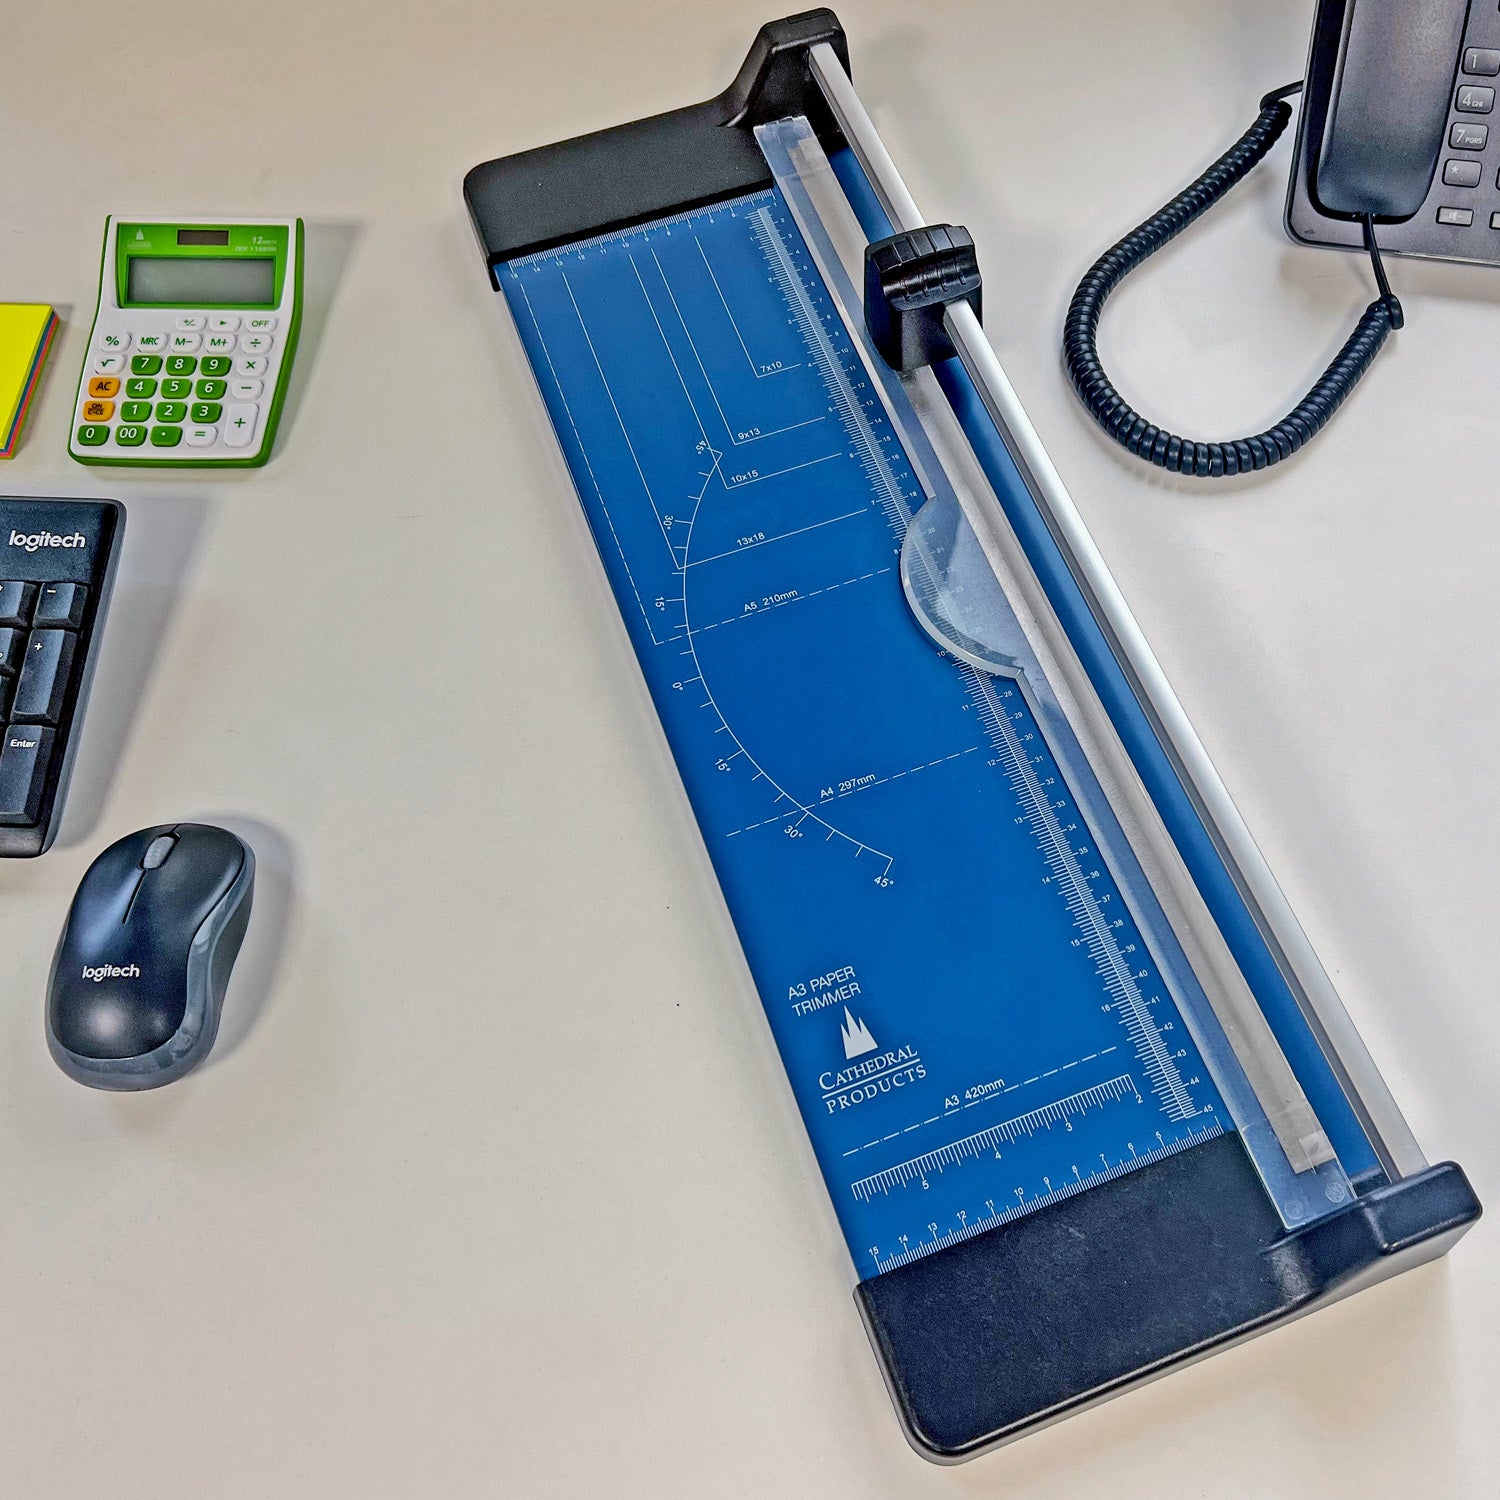 A3 rotary paper trimmer cutter placed on an office desk, featuring a blue metal base with measurement grid, surrounded by office essentials like a calculator, mouse, keyboard, and telephone, illustrating a typical workspace setup.